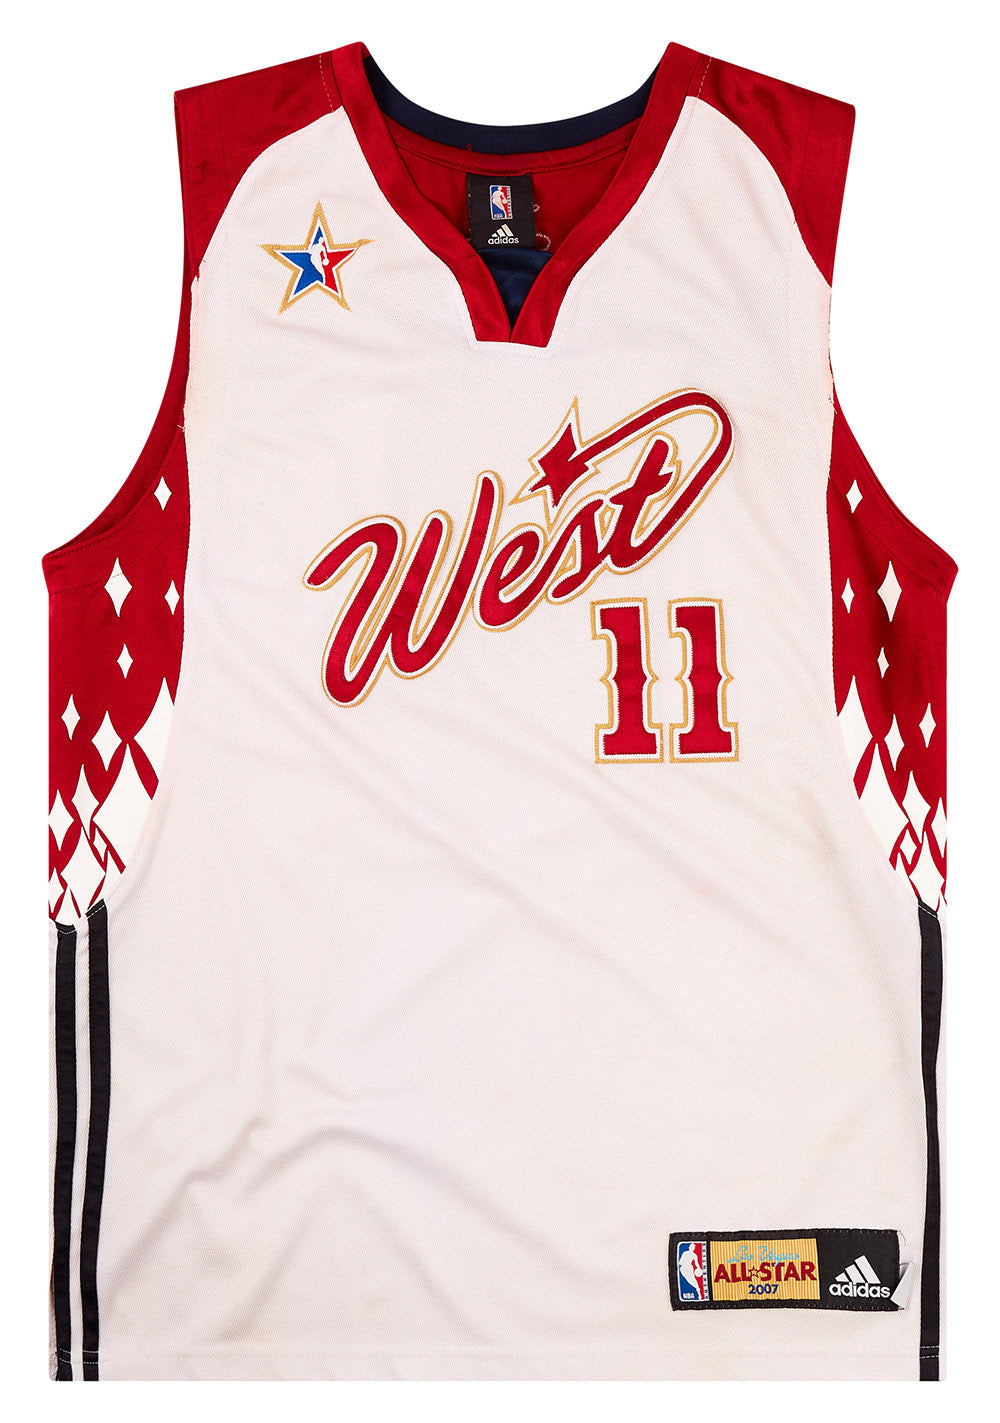 2007 AUTHENTIC NBA ALL-STAR GAME YAO #11 ADIDAS JERSEY M